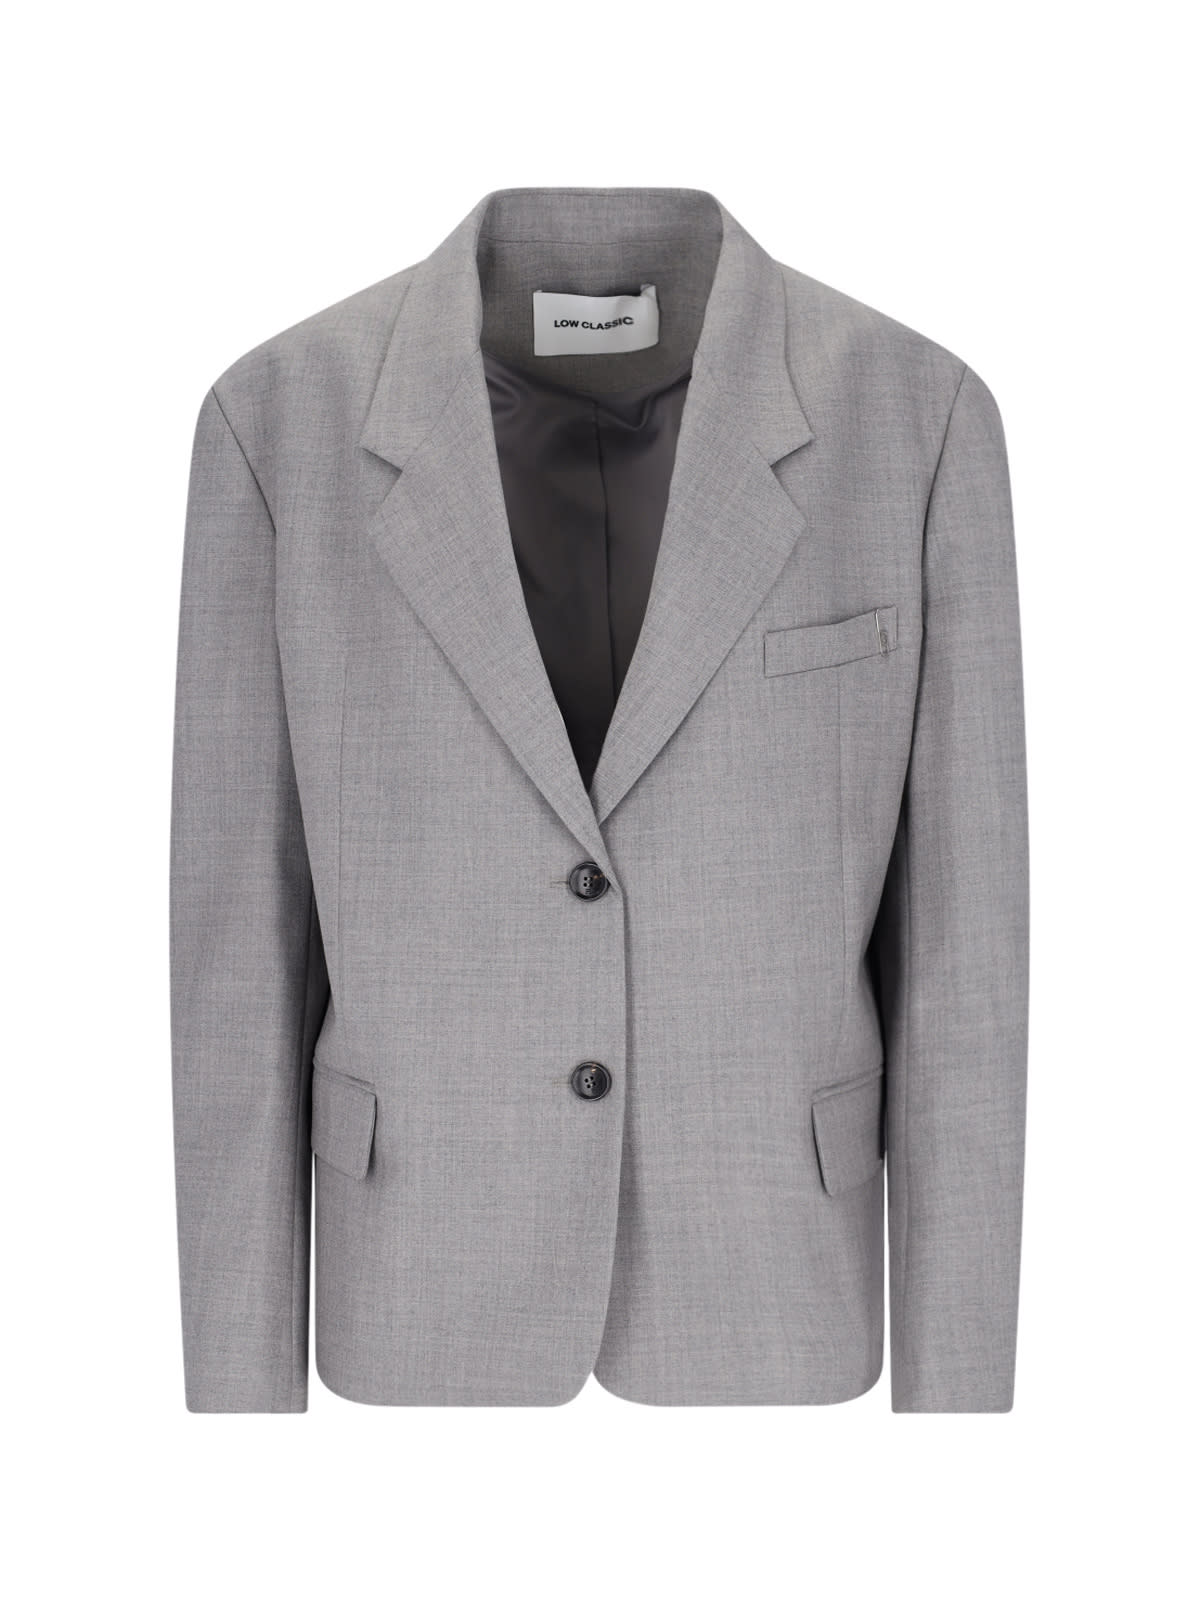 Low Classic Single-breasted Blazer In Gray